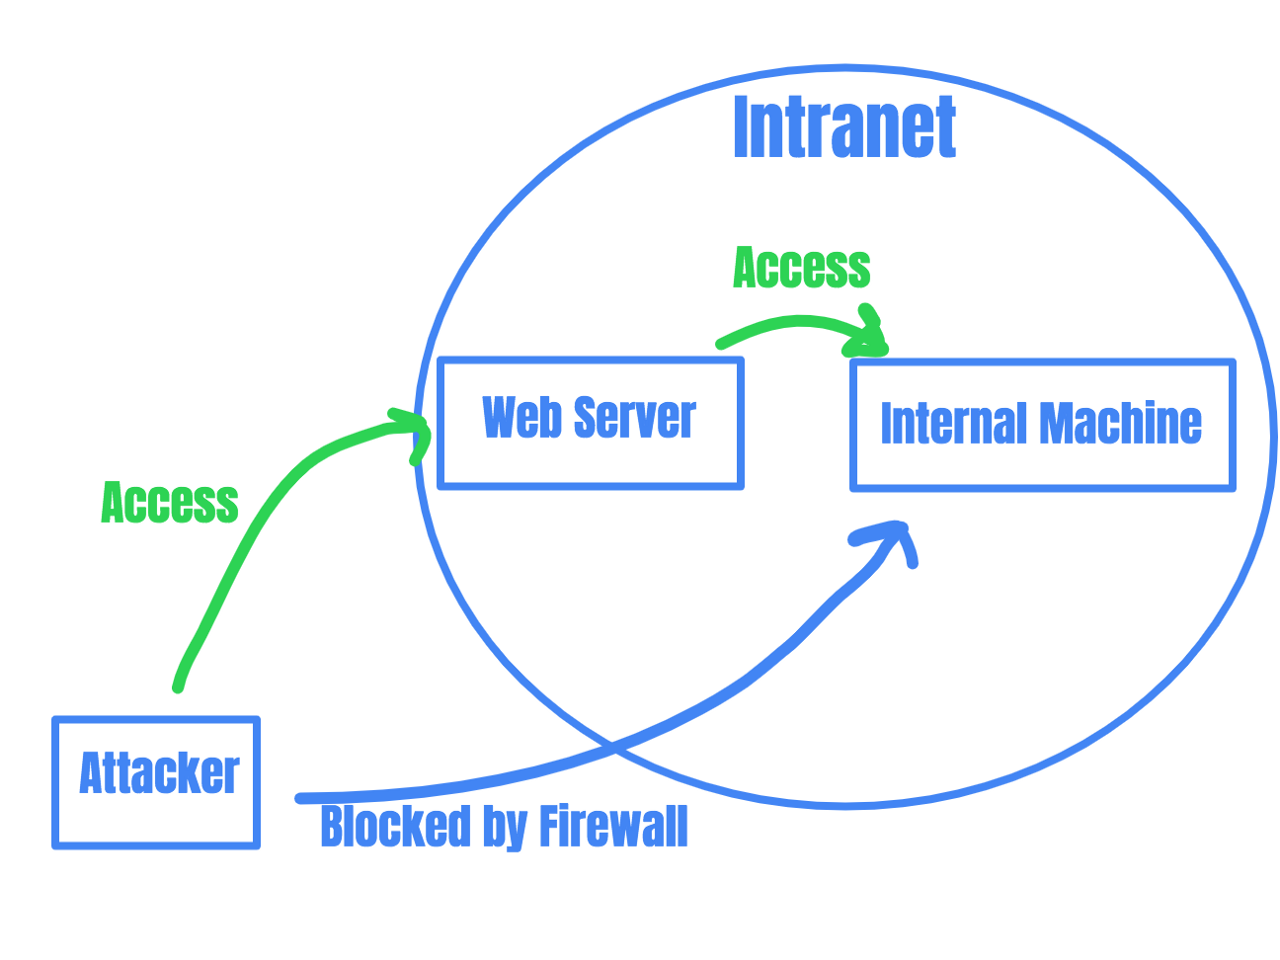 Graphic showing an attacker machine which is blocked from accessing the internal machine directly, but is able to access a web server which does have access to the internal machine